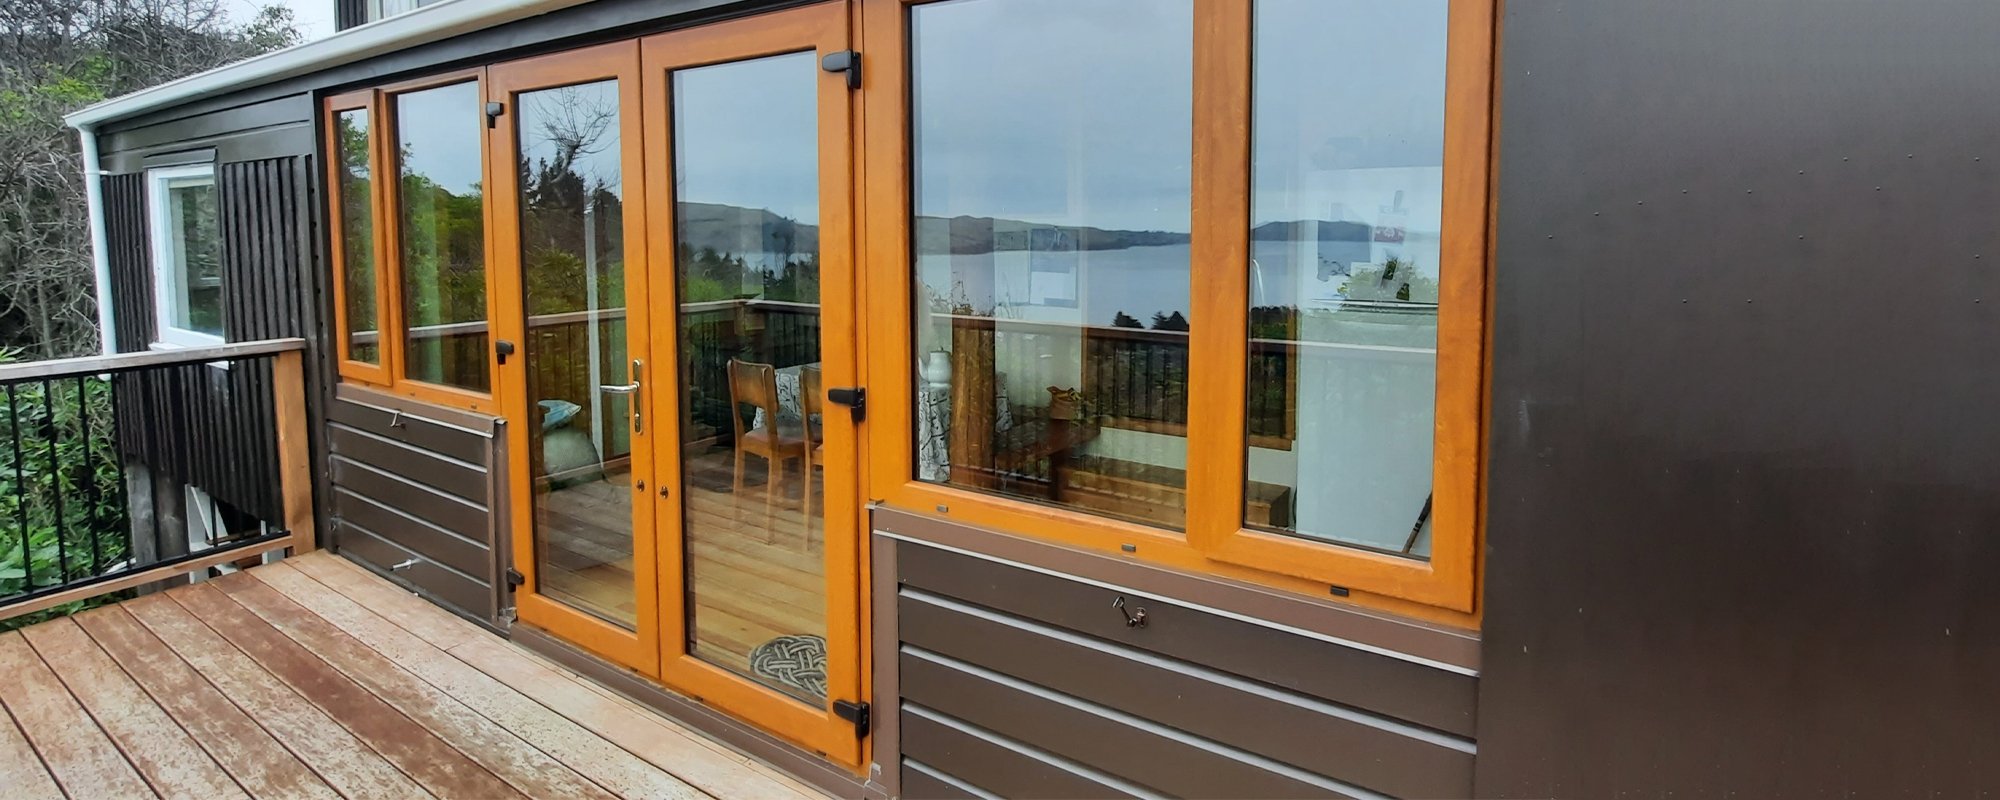 Small brown house with a wooden deck and contrasting orange uPVC window and door frames